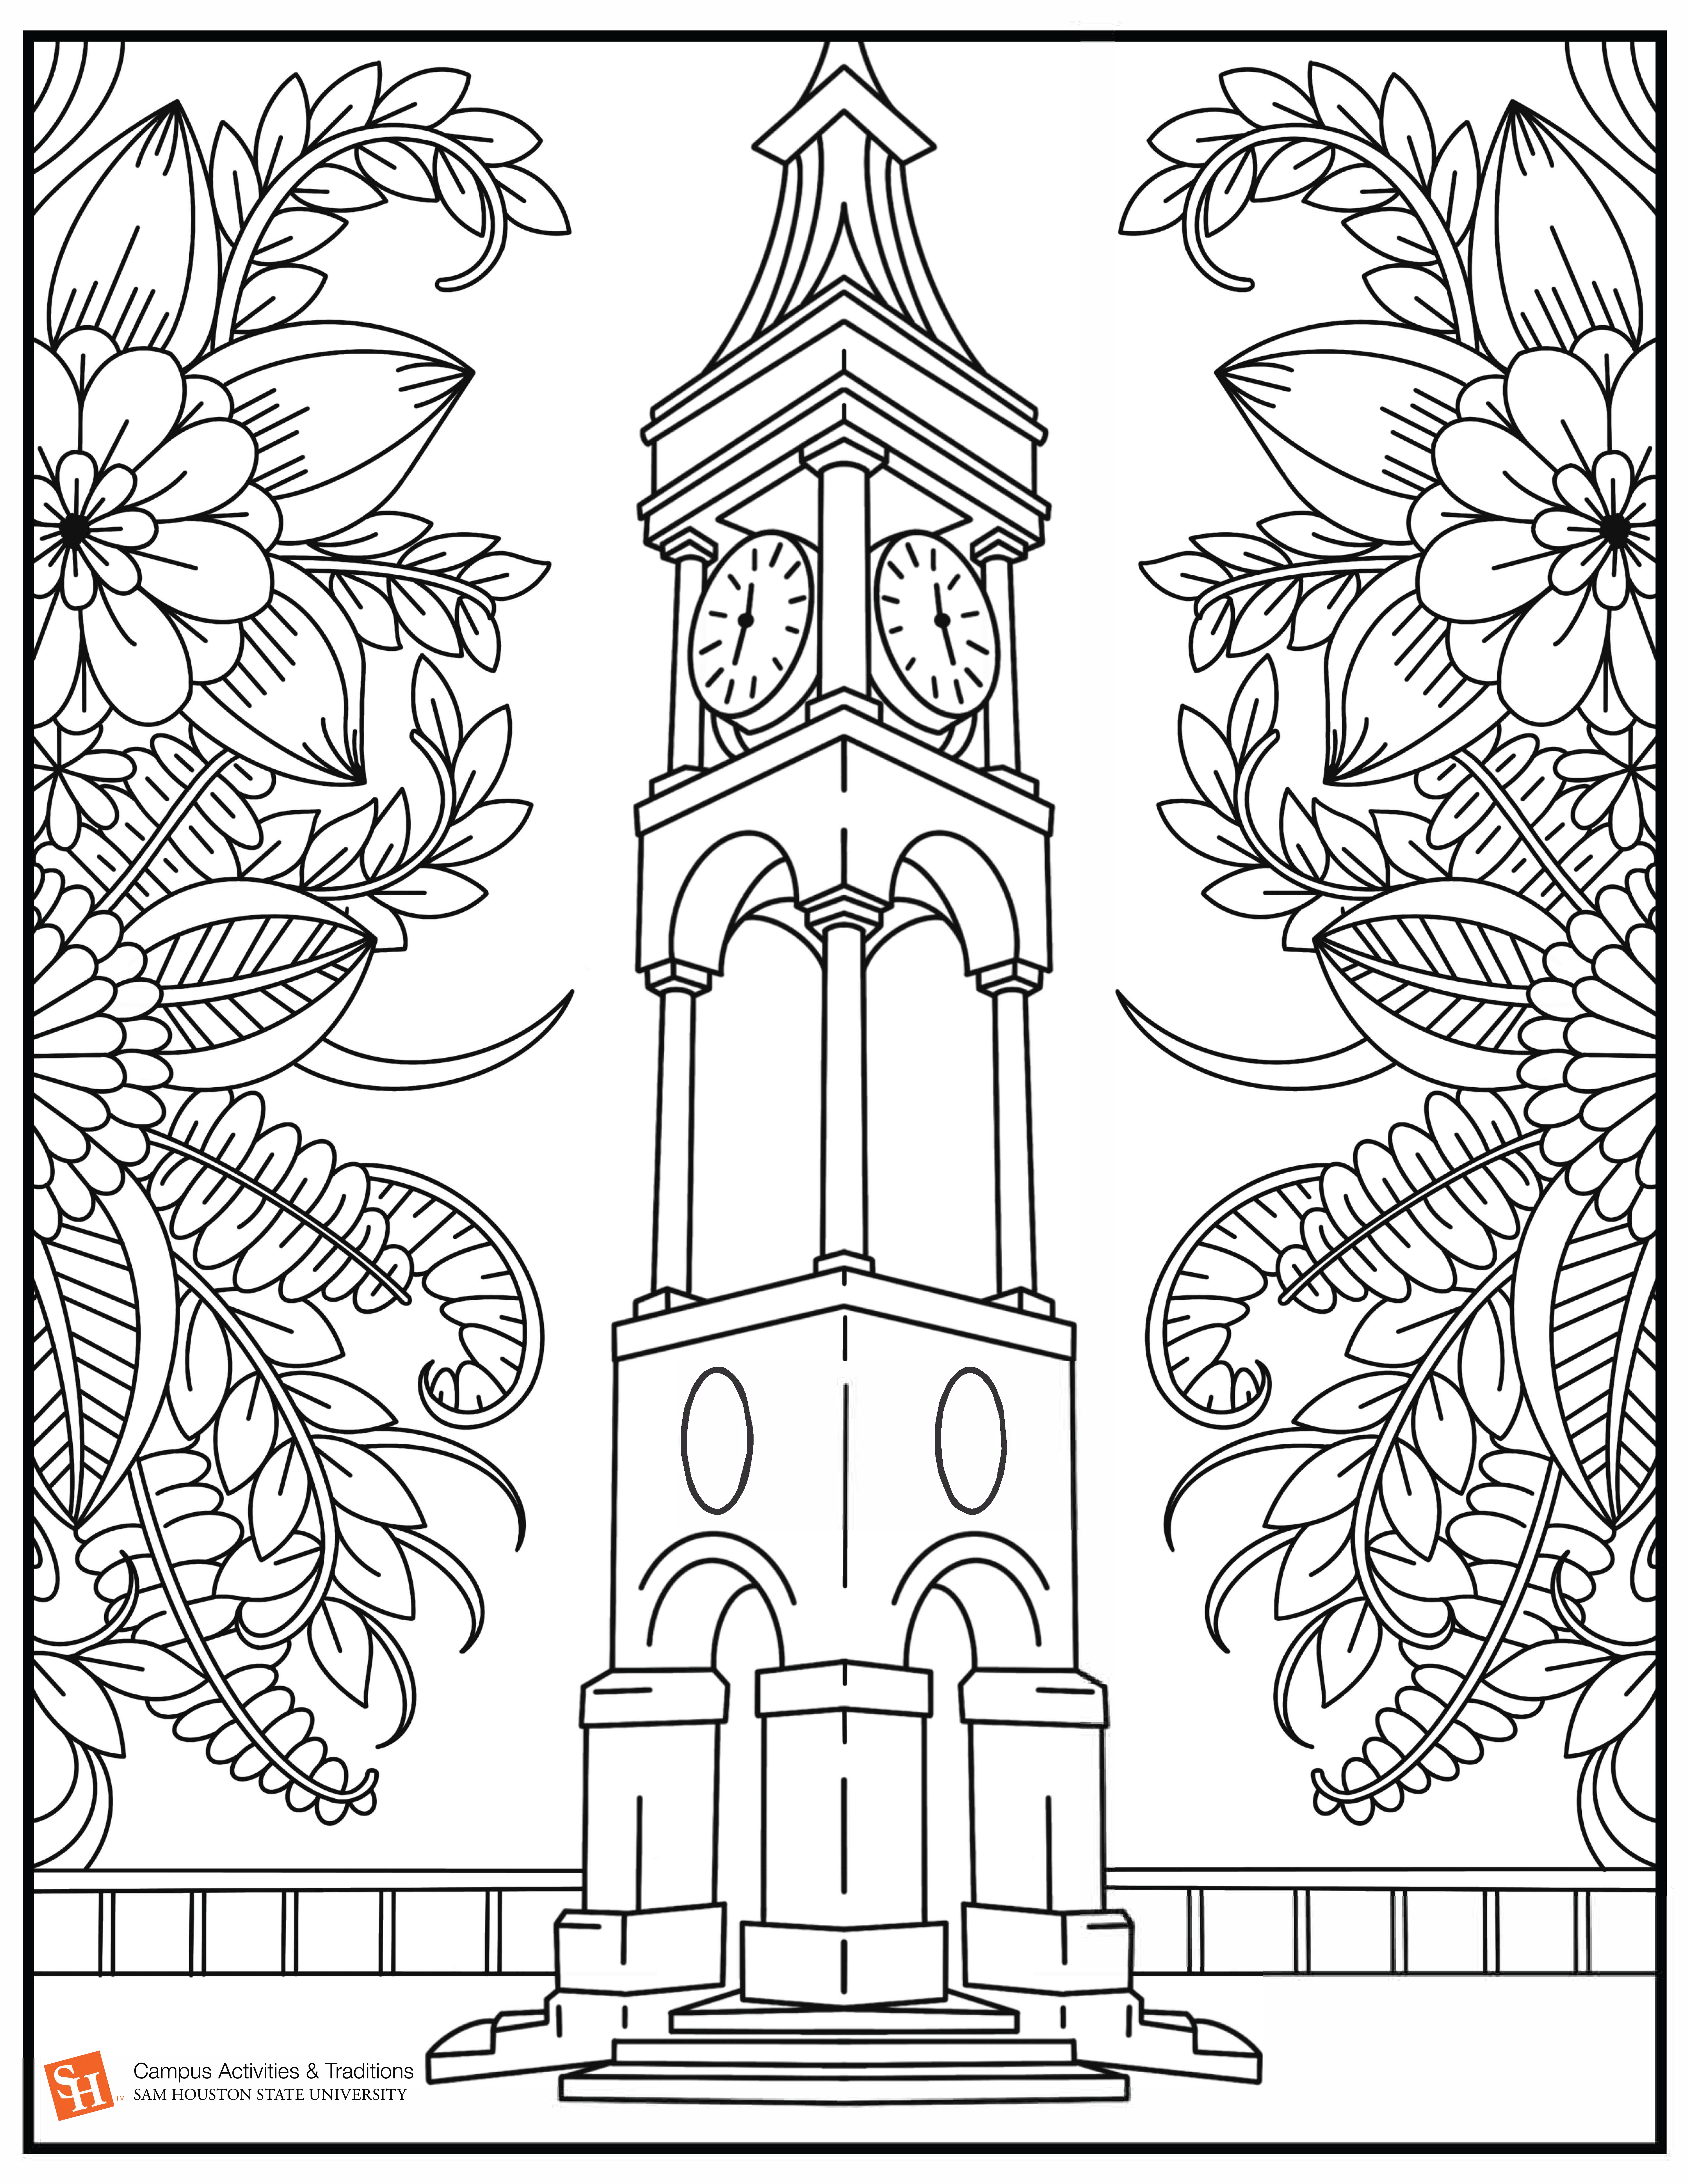 Student Activities Coloring Sheets_Page_1.png